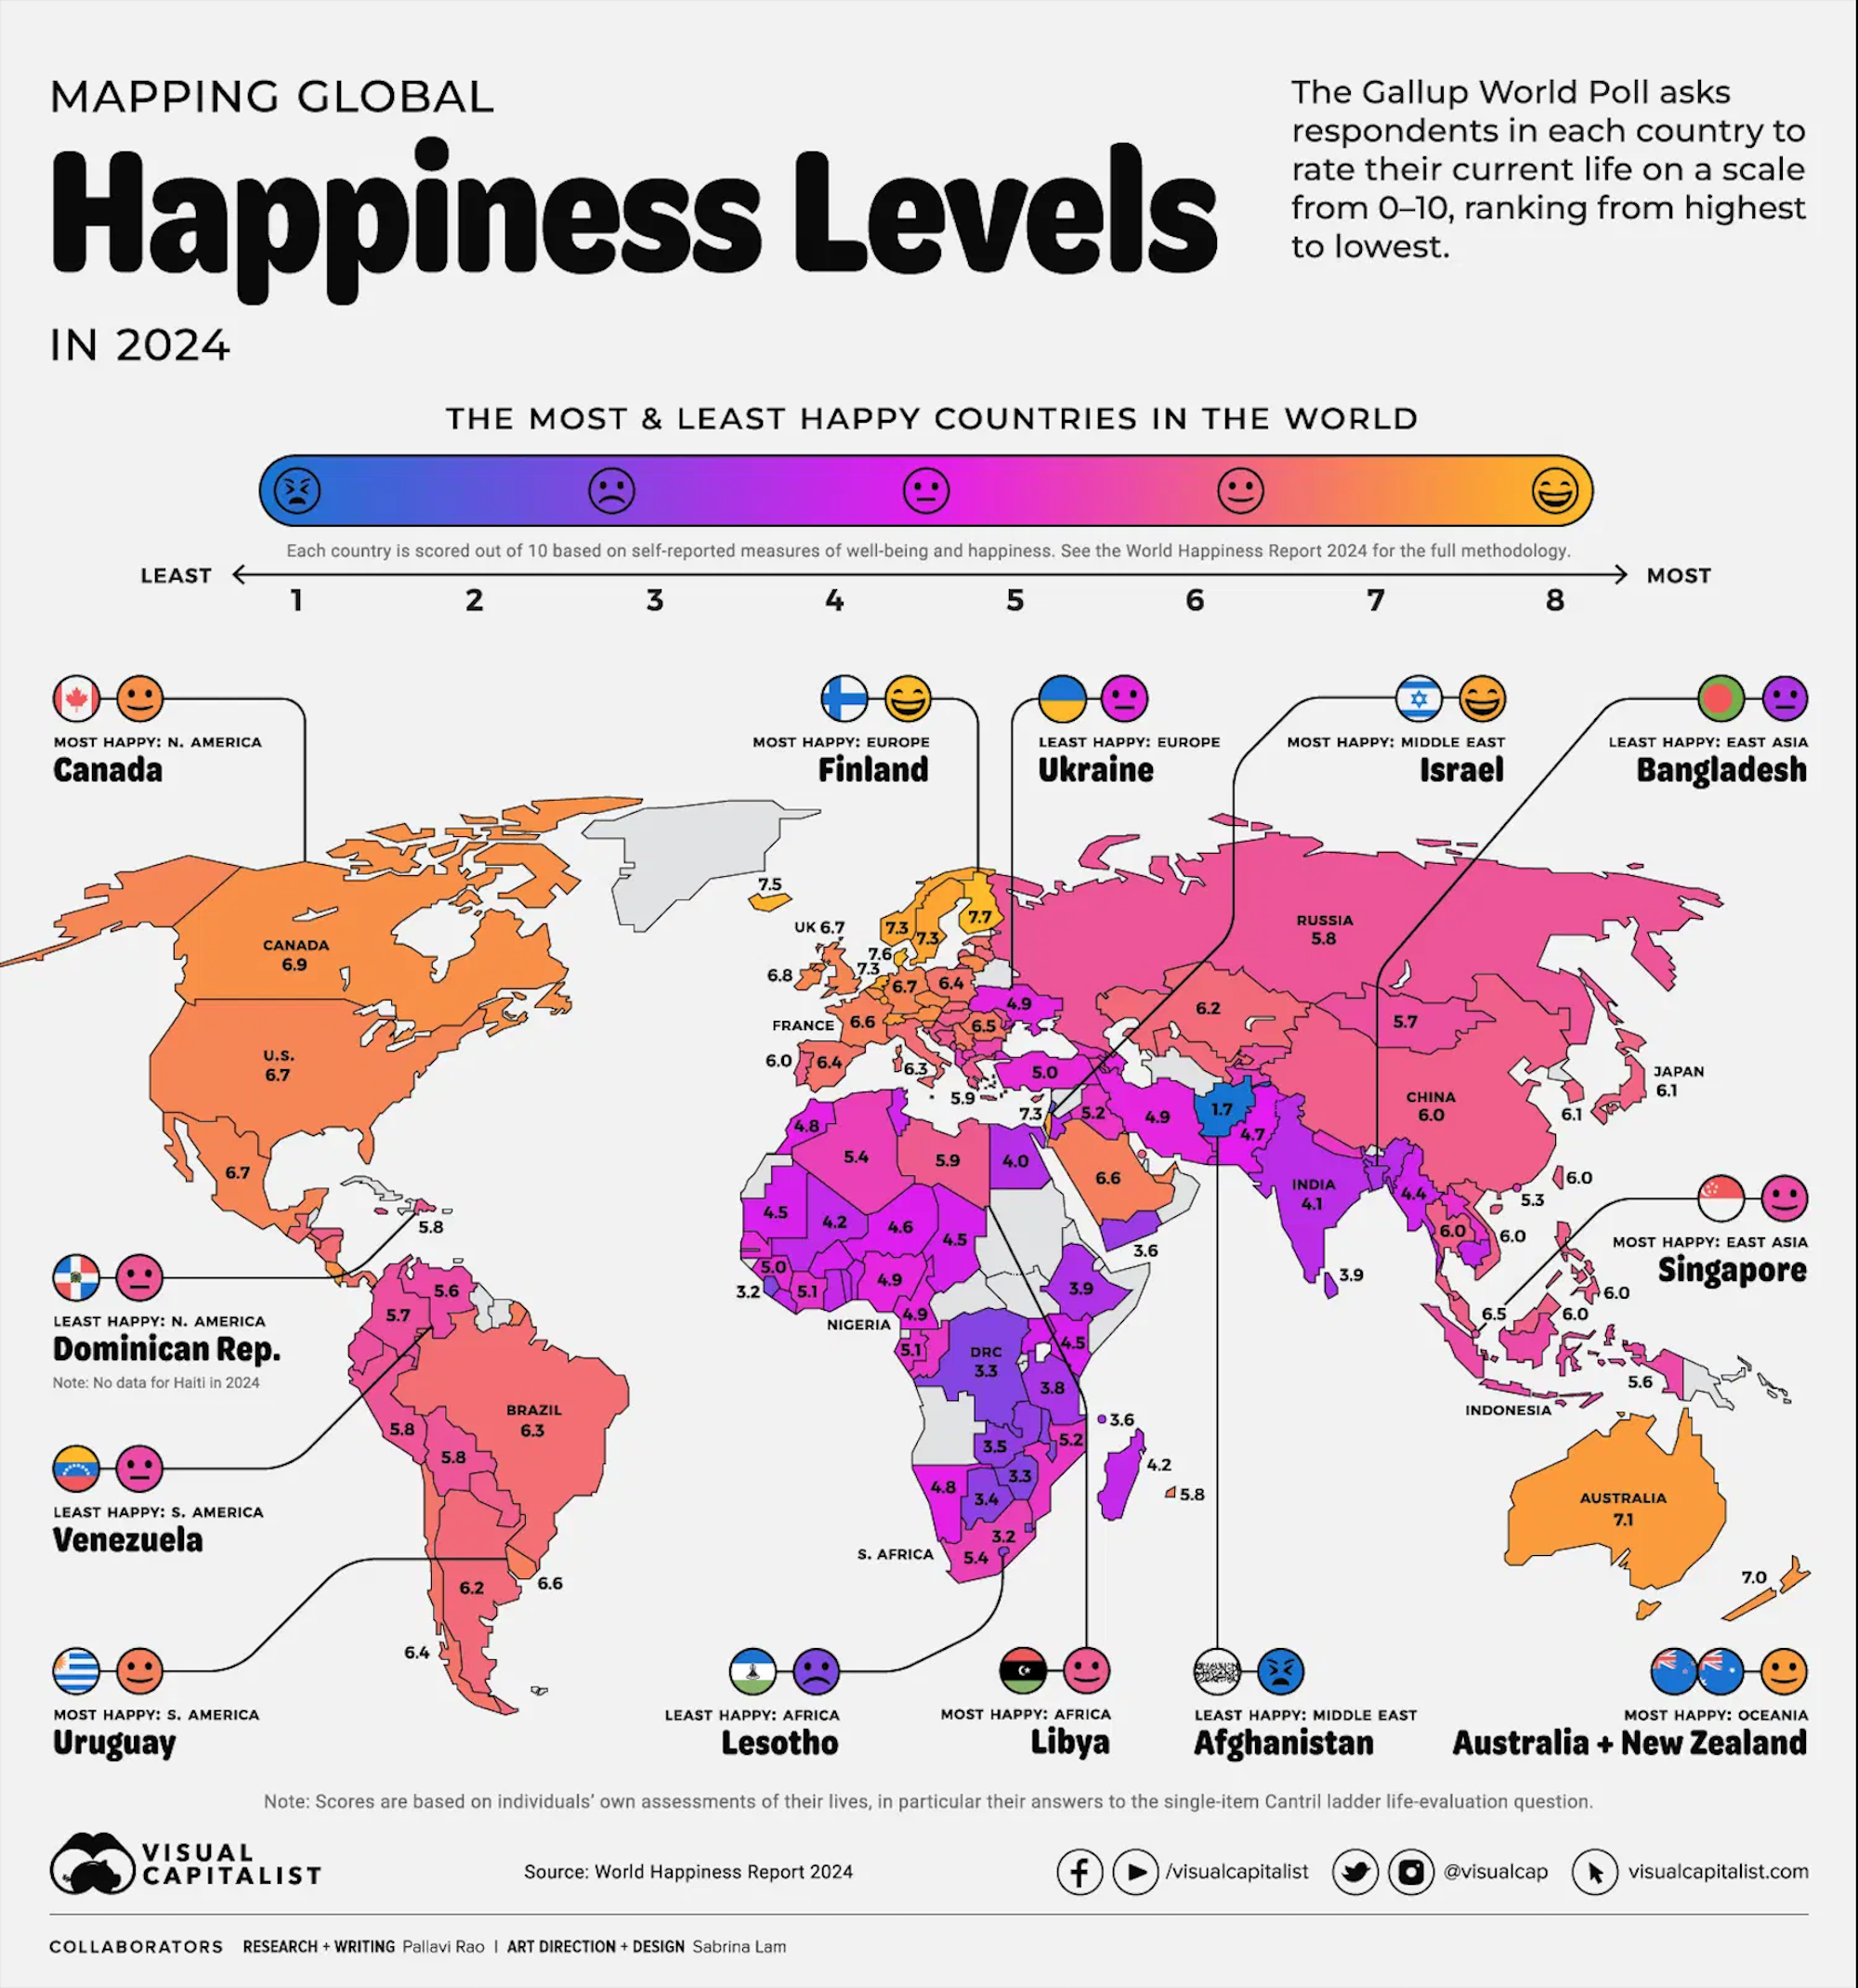 World map depicting global happiness levels by country, with a color gradient scale from least happy in purple to most happy in red.